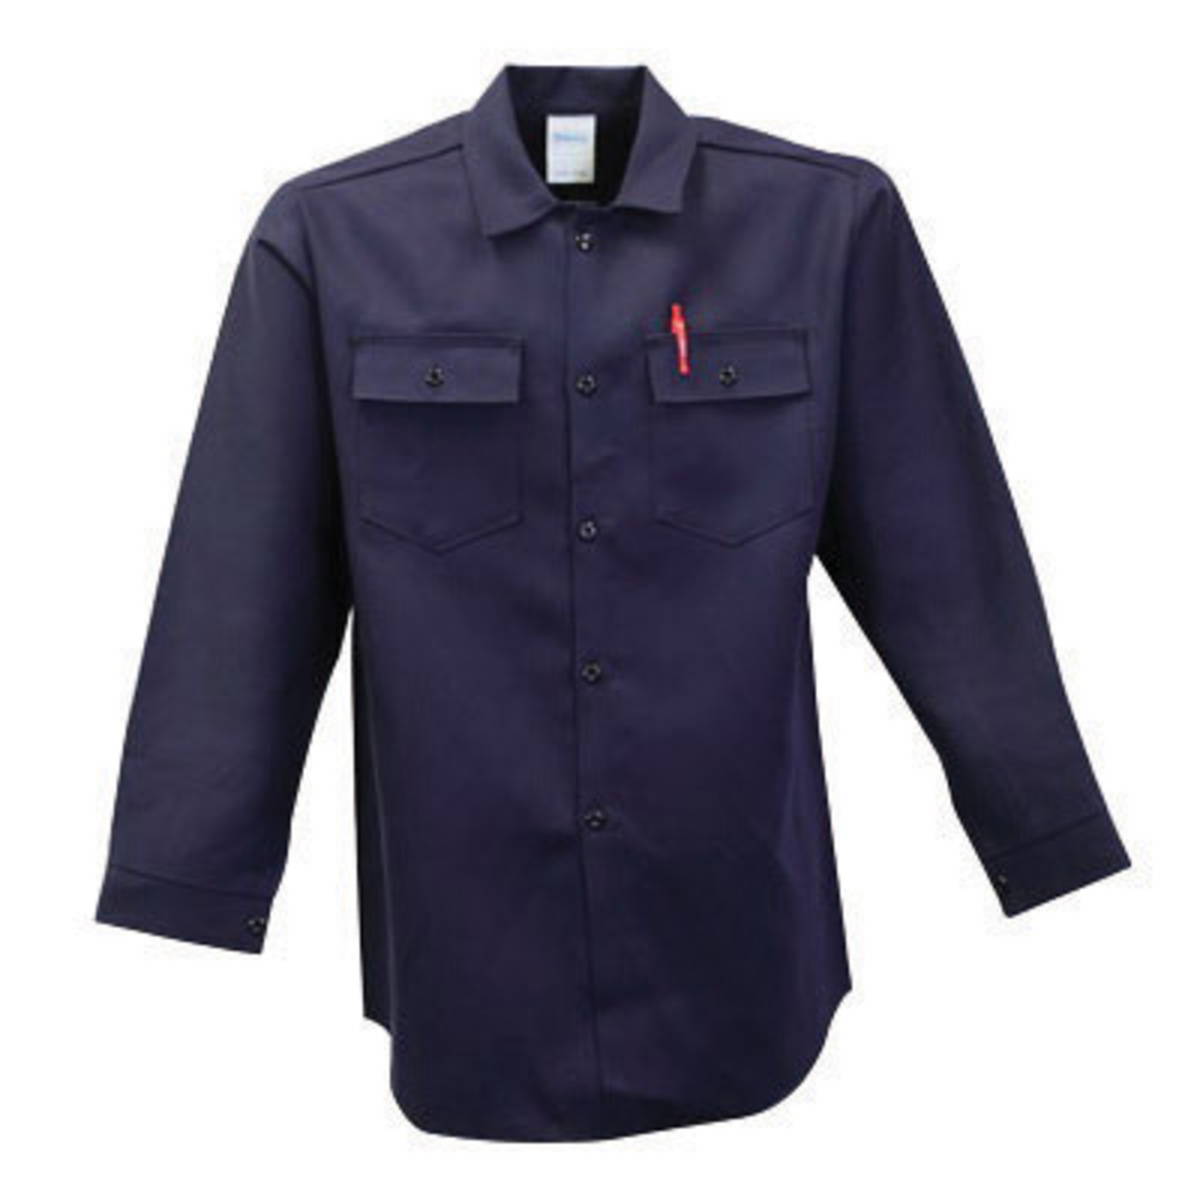 Stanco Safety Products™ Size 4X Navy Blue Indura® Arc Rated Flame Resistant Work Shirt With Button Closure